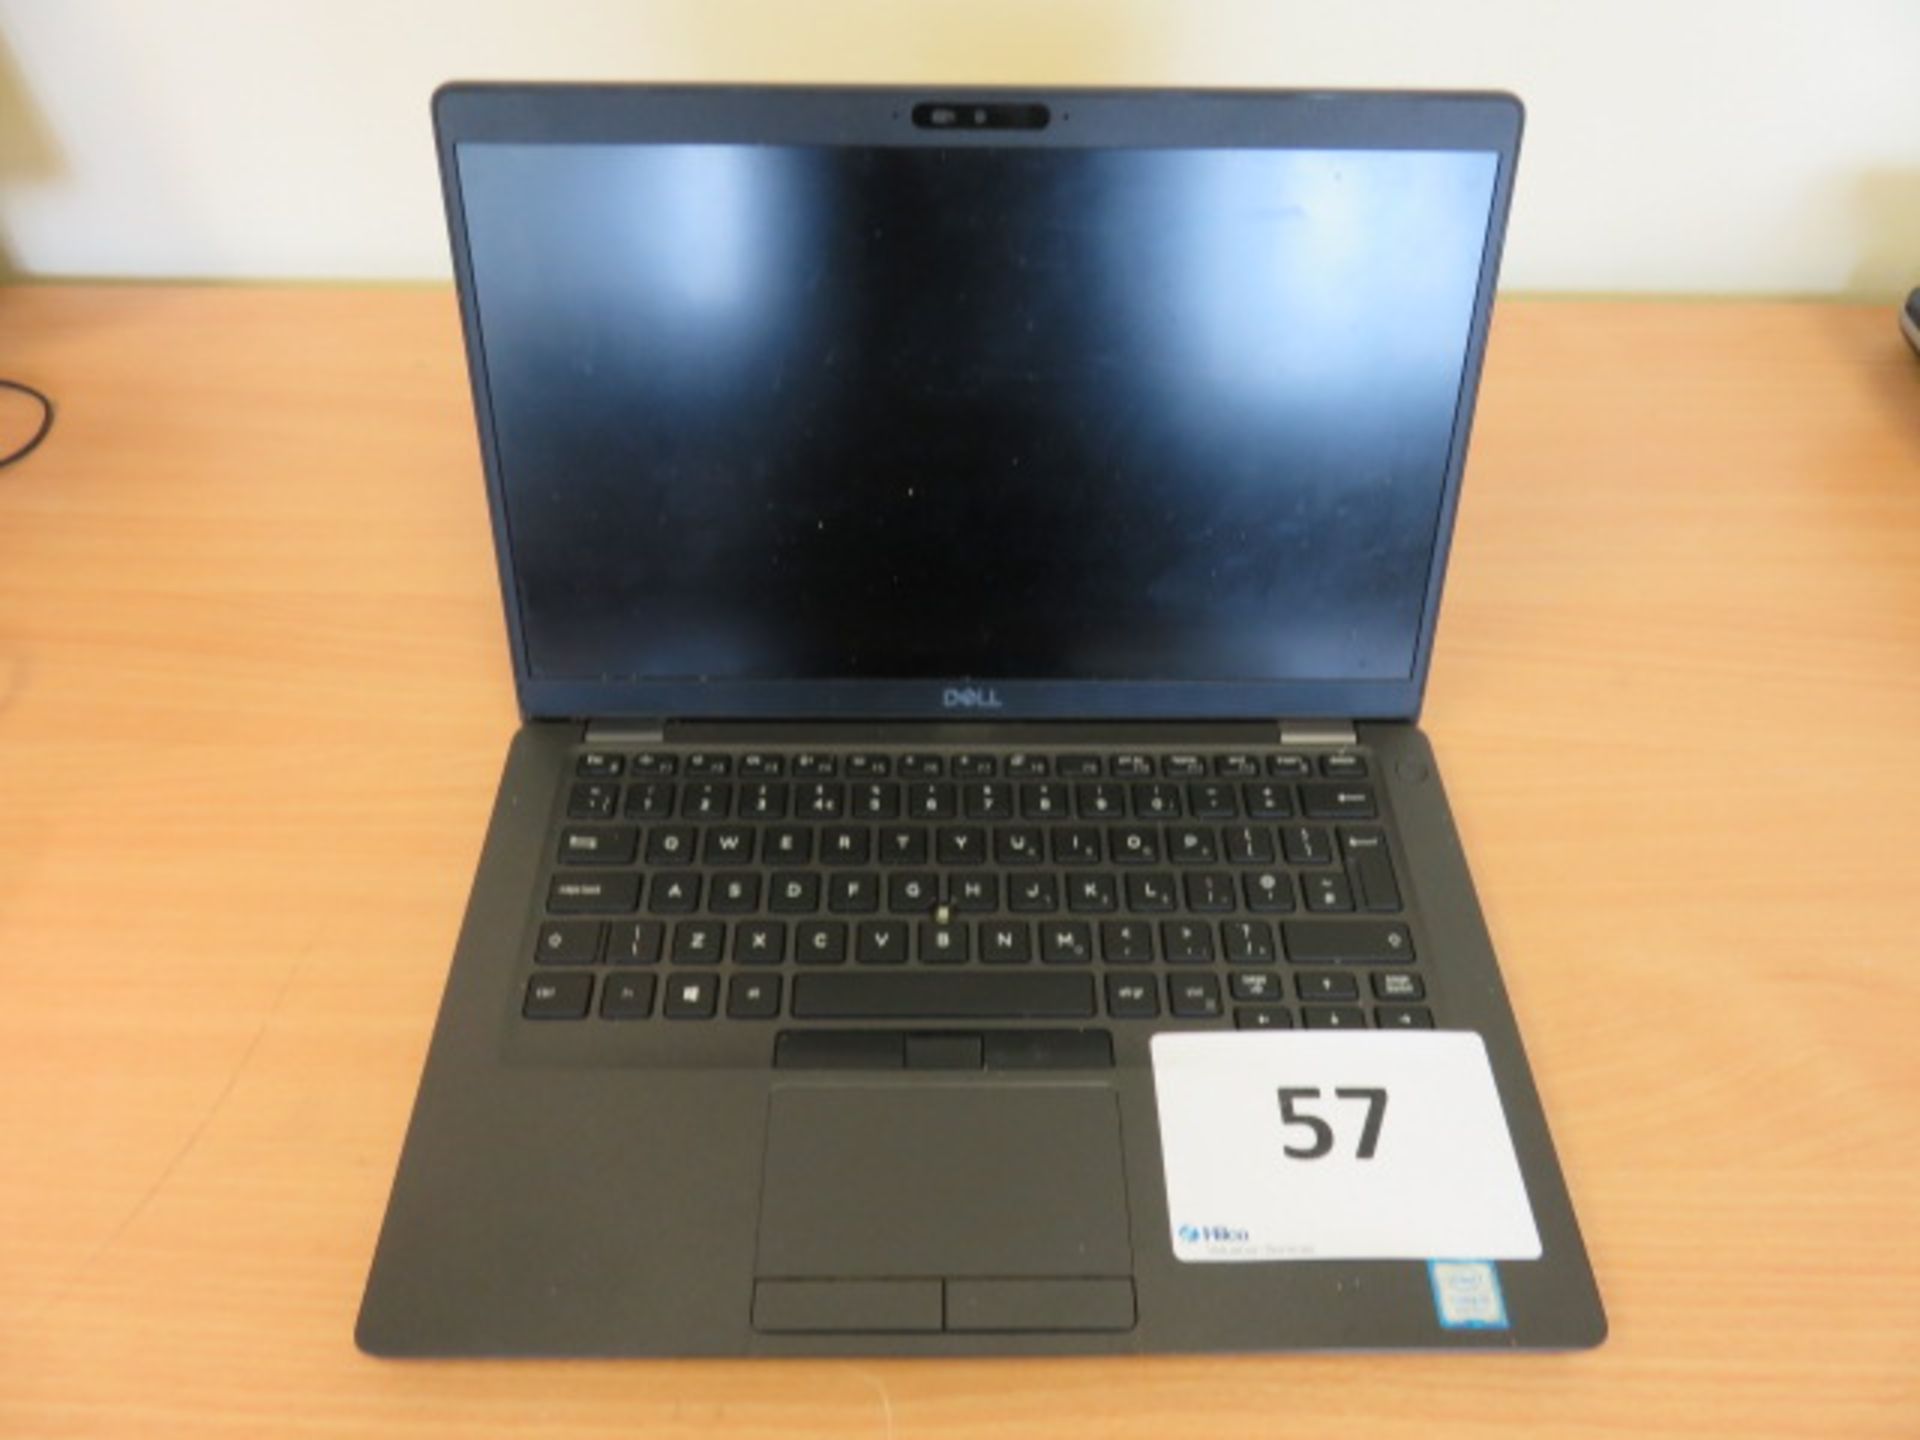 Dell Latitude 5400 14in Core i5 8th Gen Laptop Serial No. 23FCYY2 (2019) (Asset No. LTW-288)